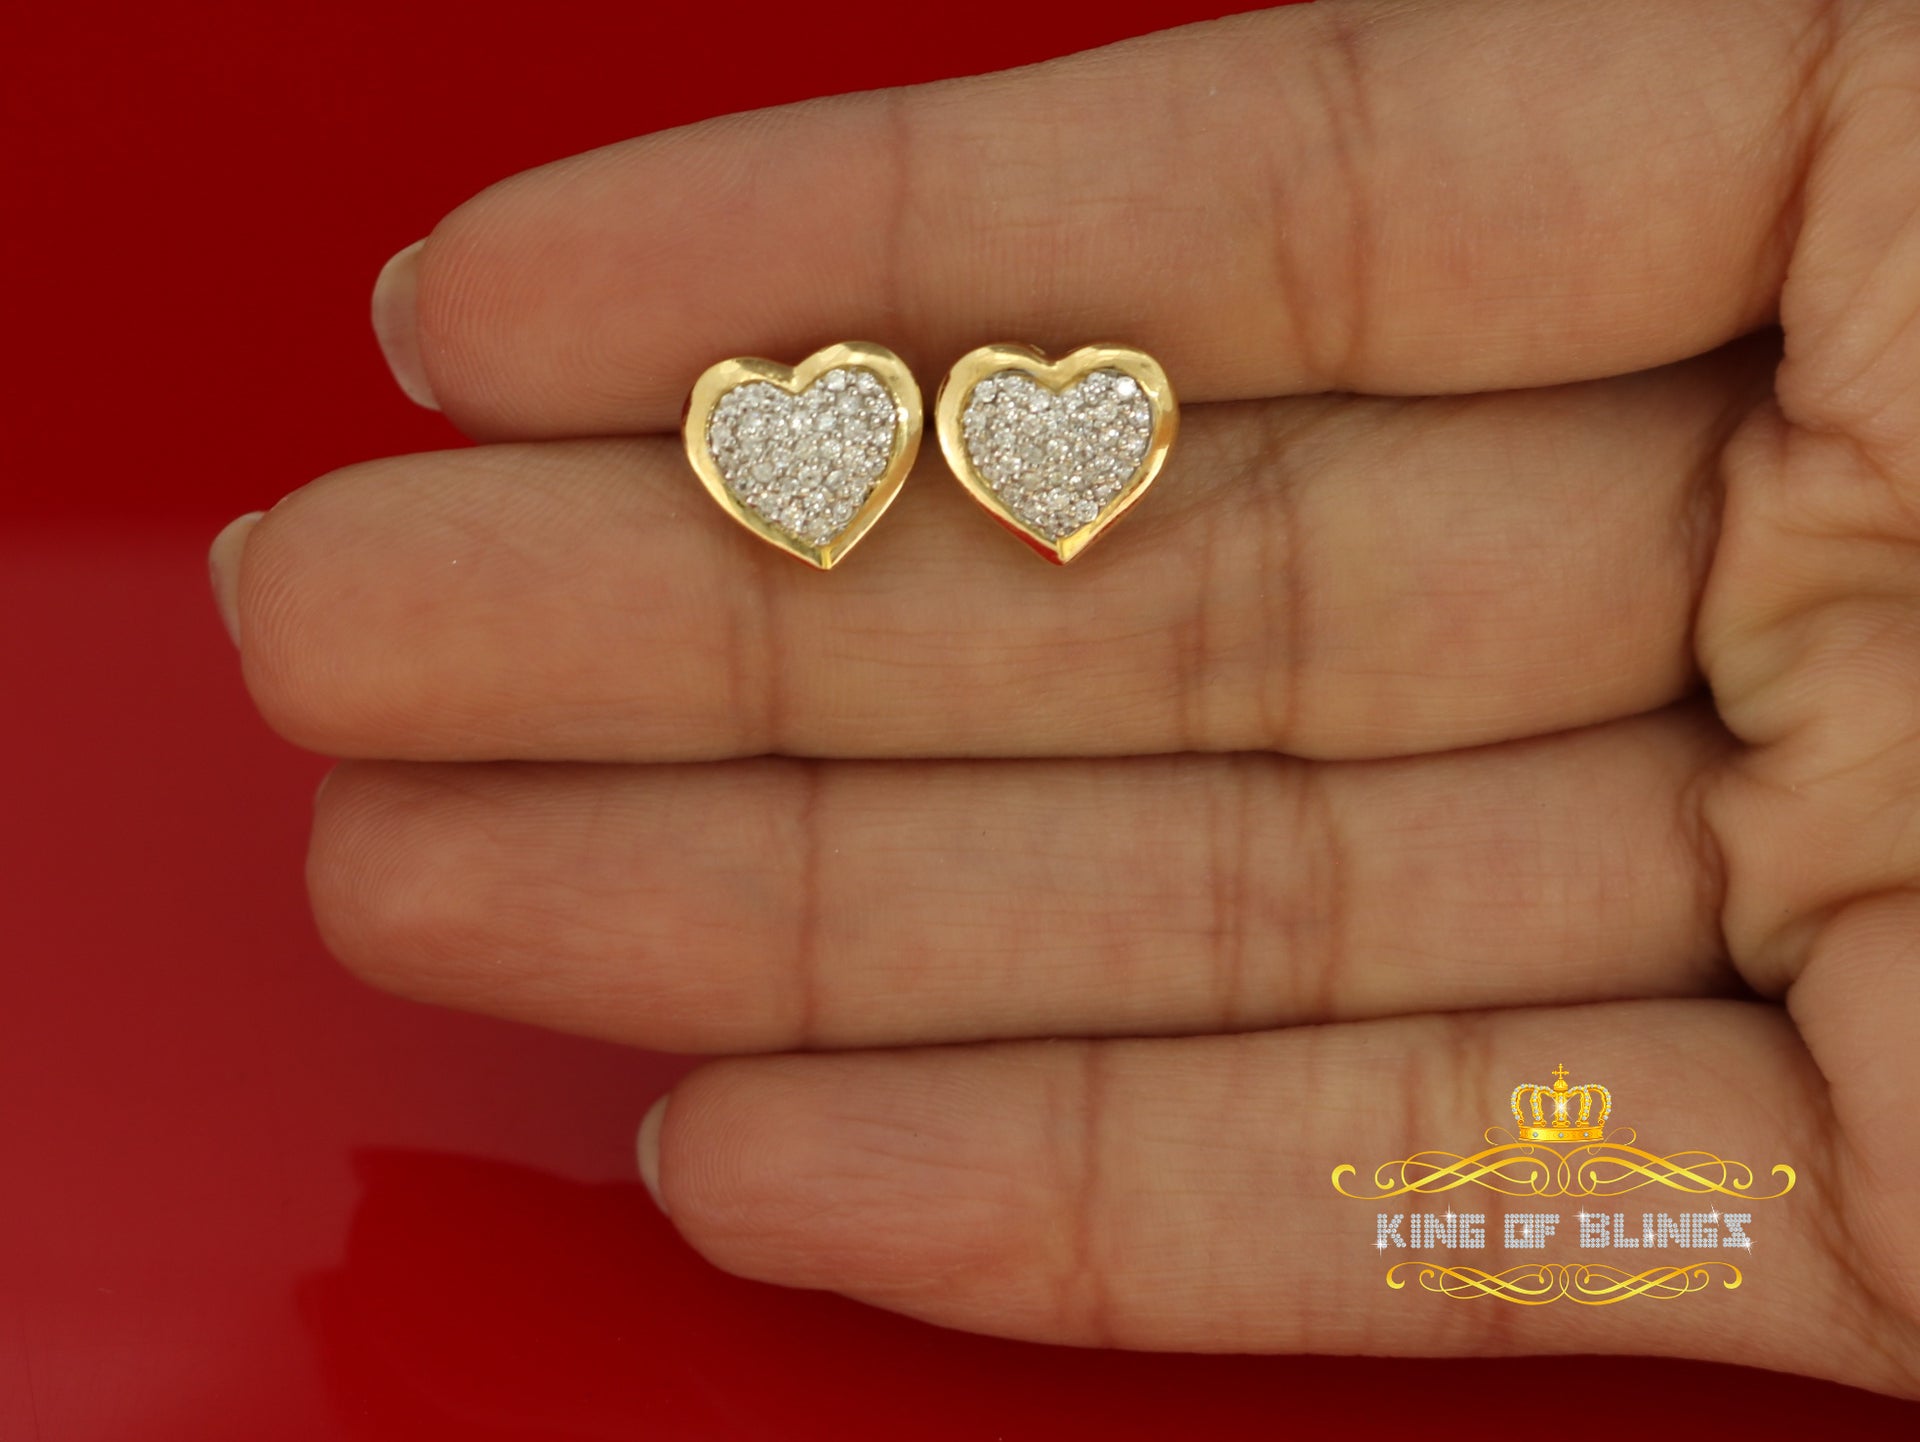 King of Bling's Aretes Para Hombre 925 Yellow Silver 0.71ct Cubic Zirconia Heart Women's Earring KING OF BLINGS